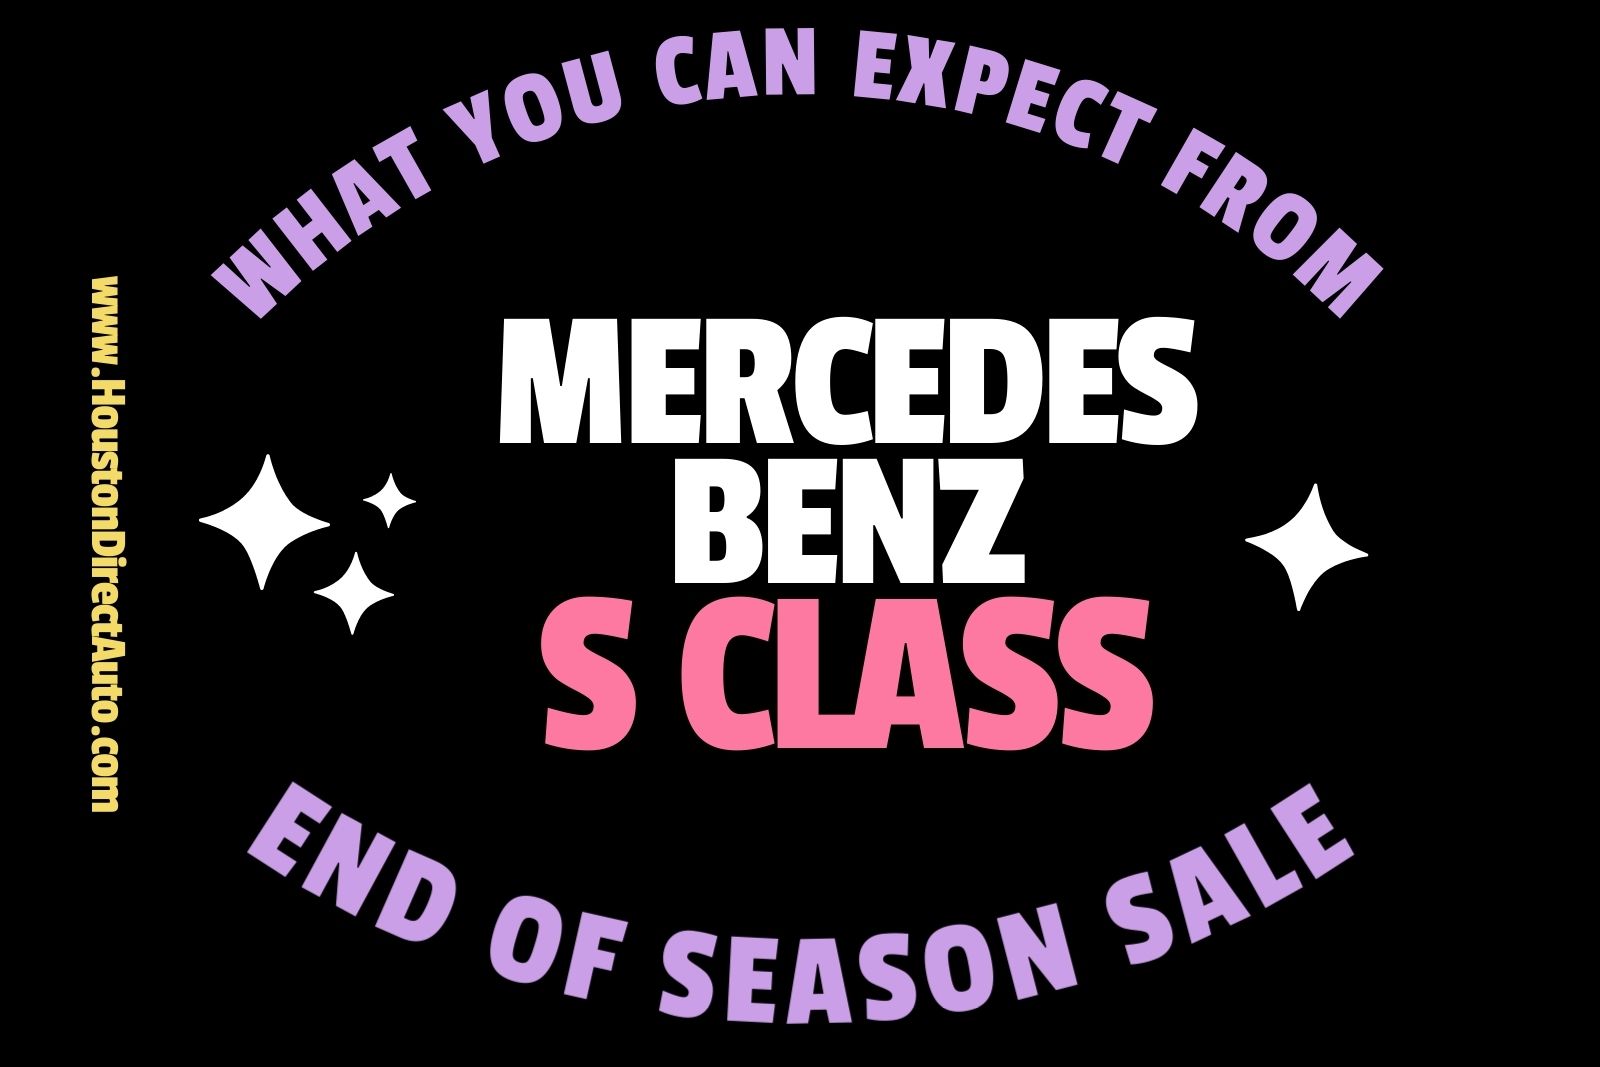 What You Can Expect From A Used Mercedes Benz S Class?